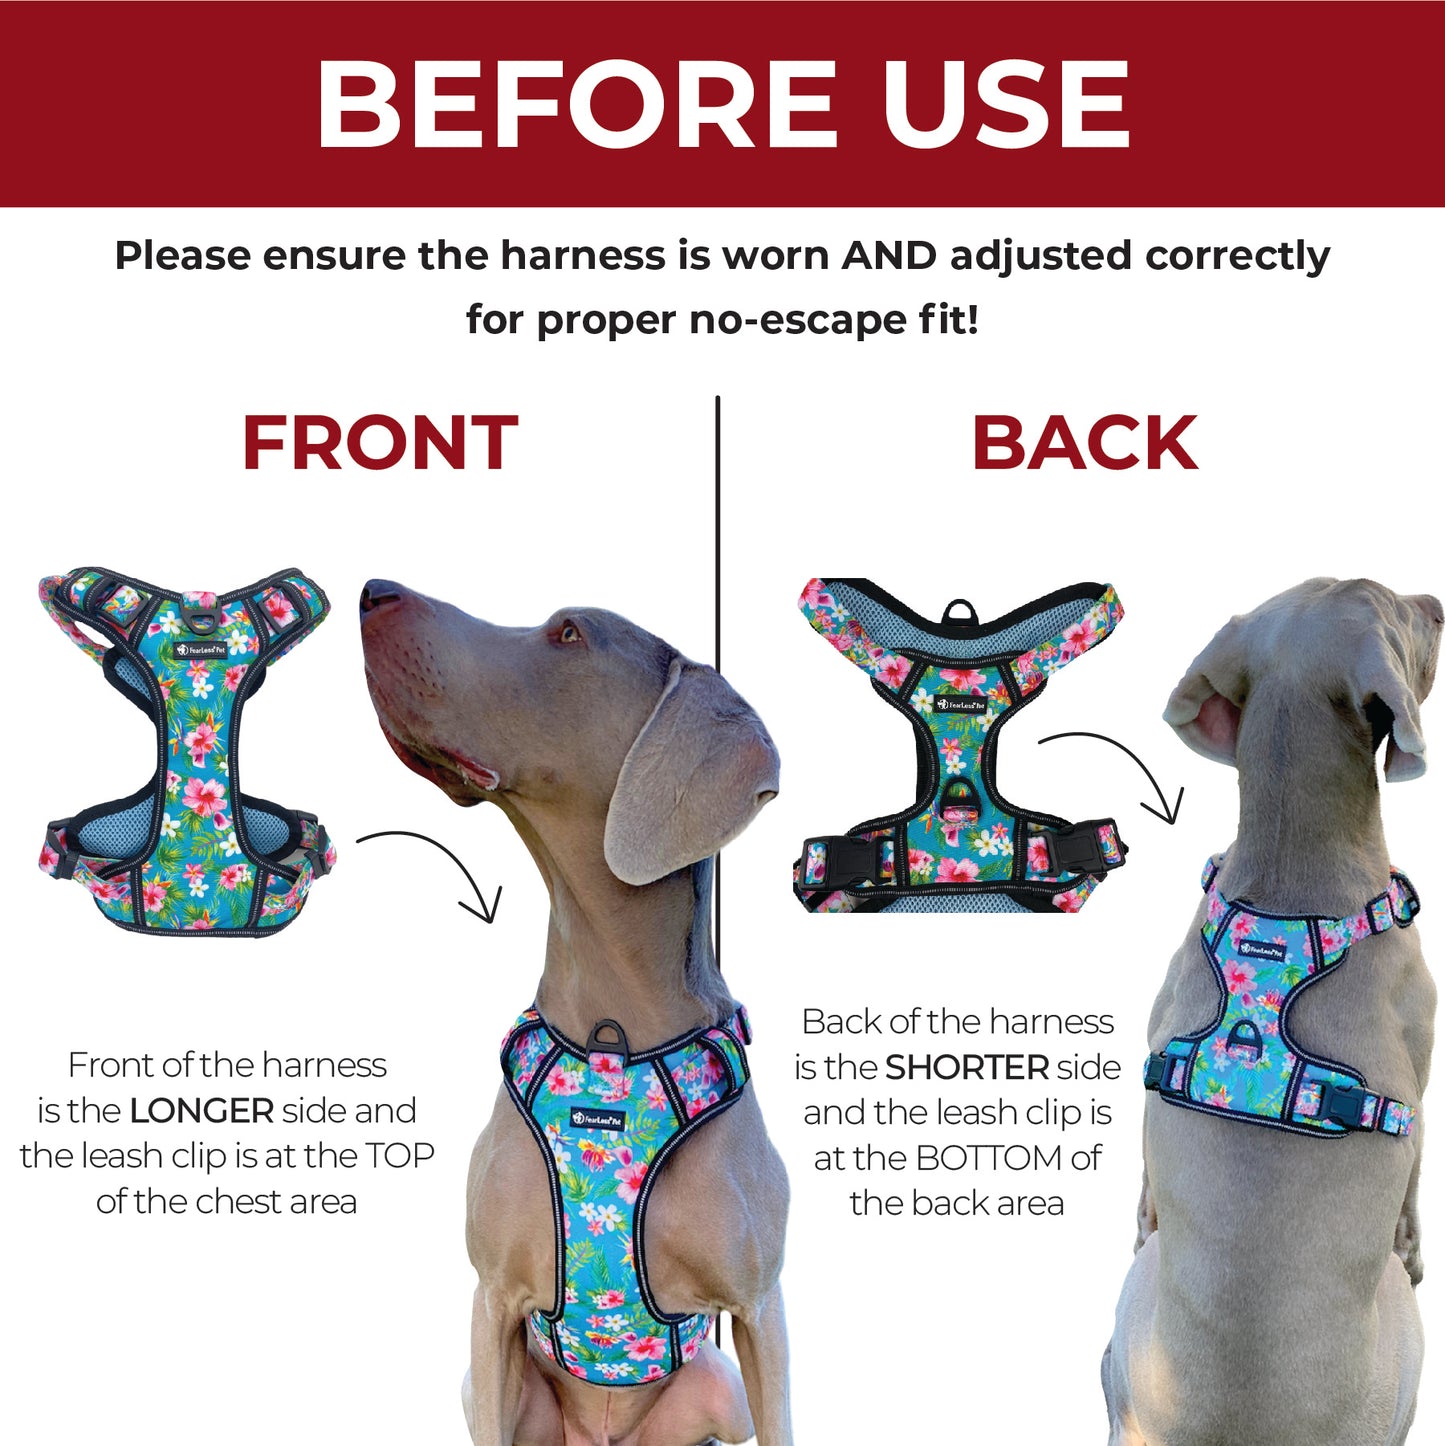 a before use infographic for a escape proof dog harness by fearless pet